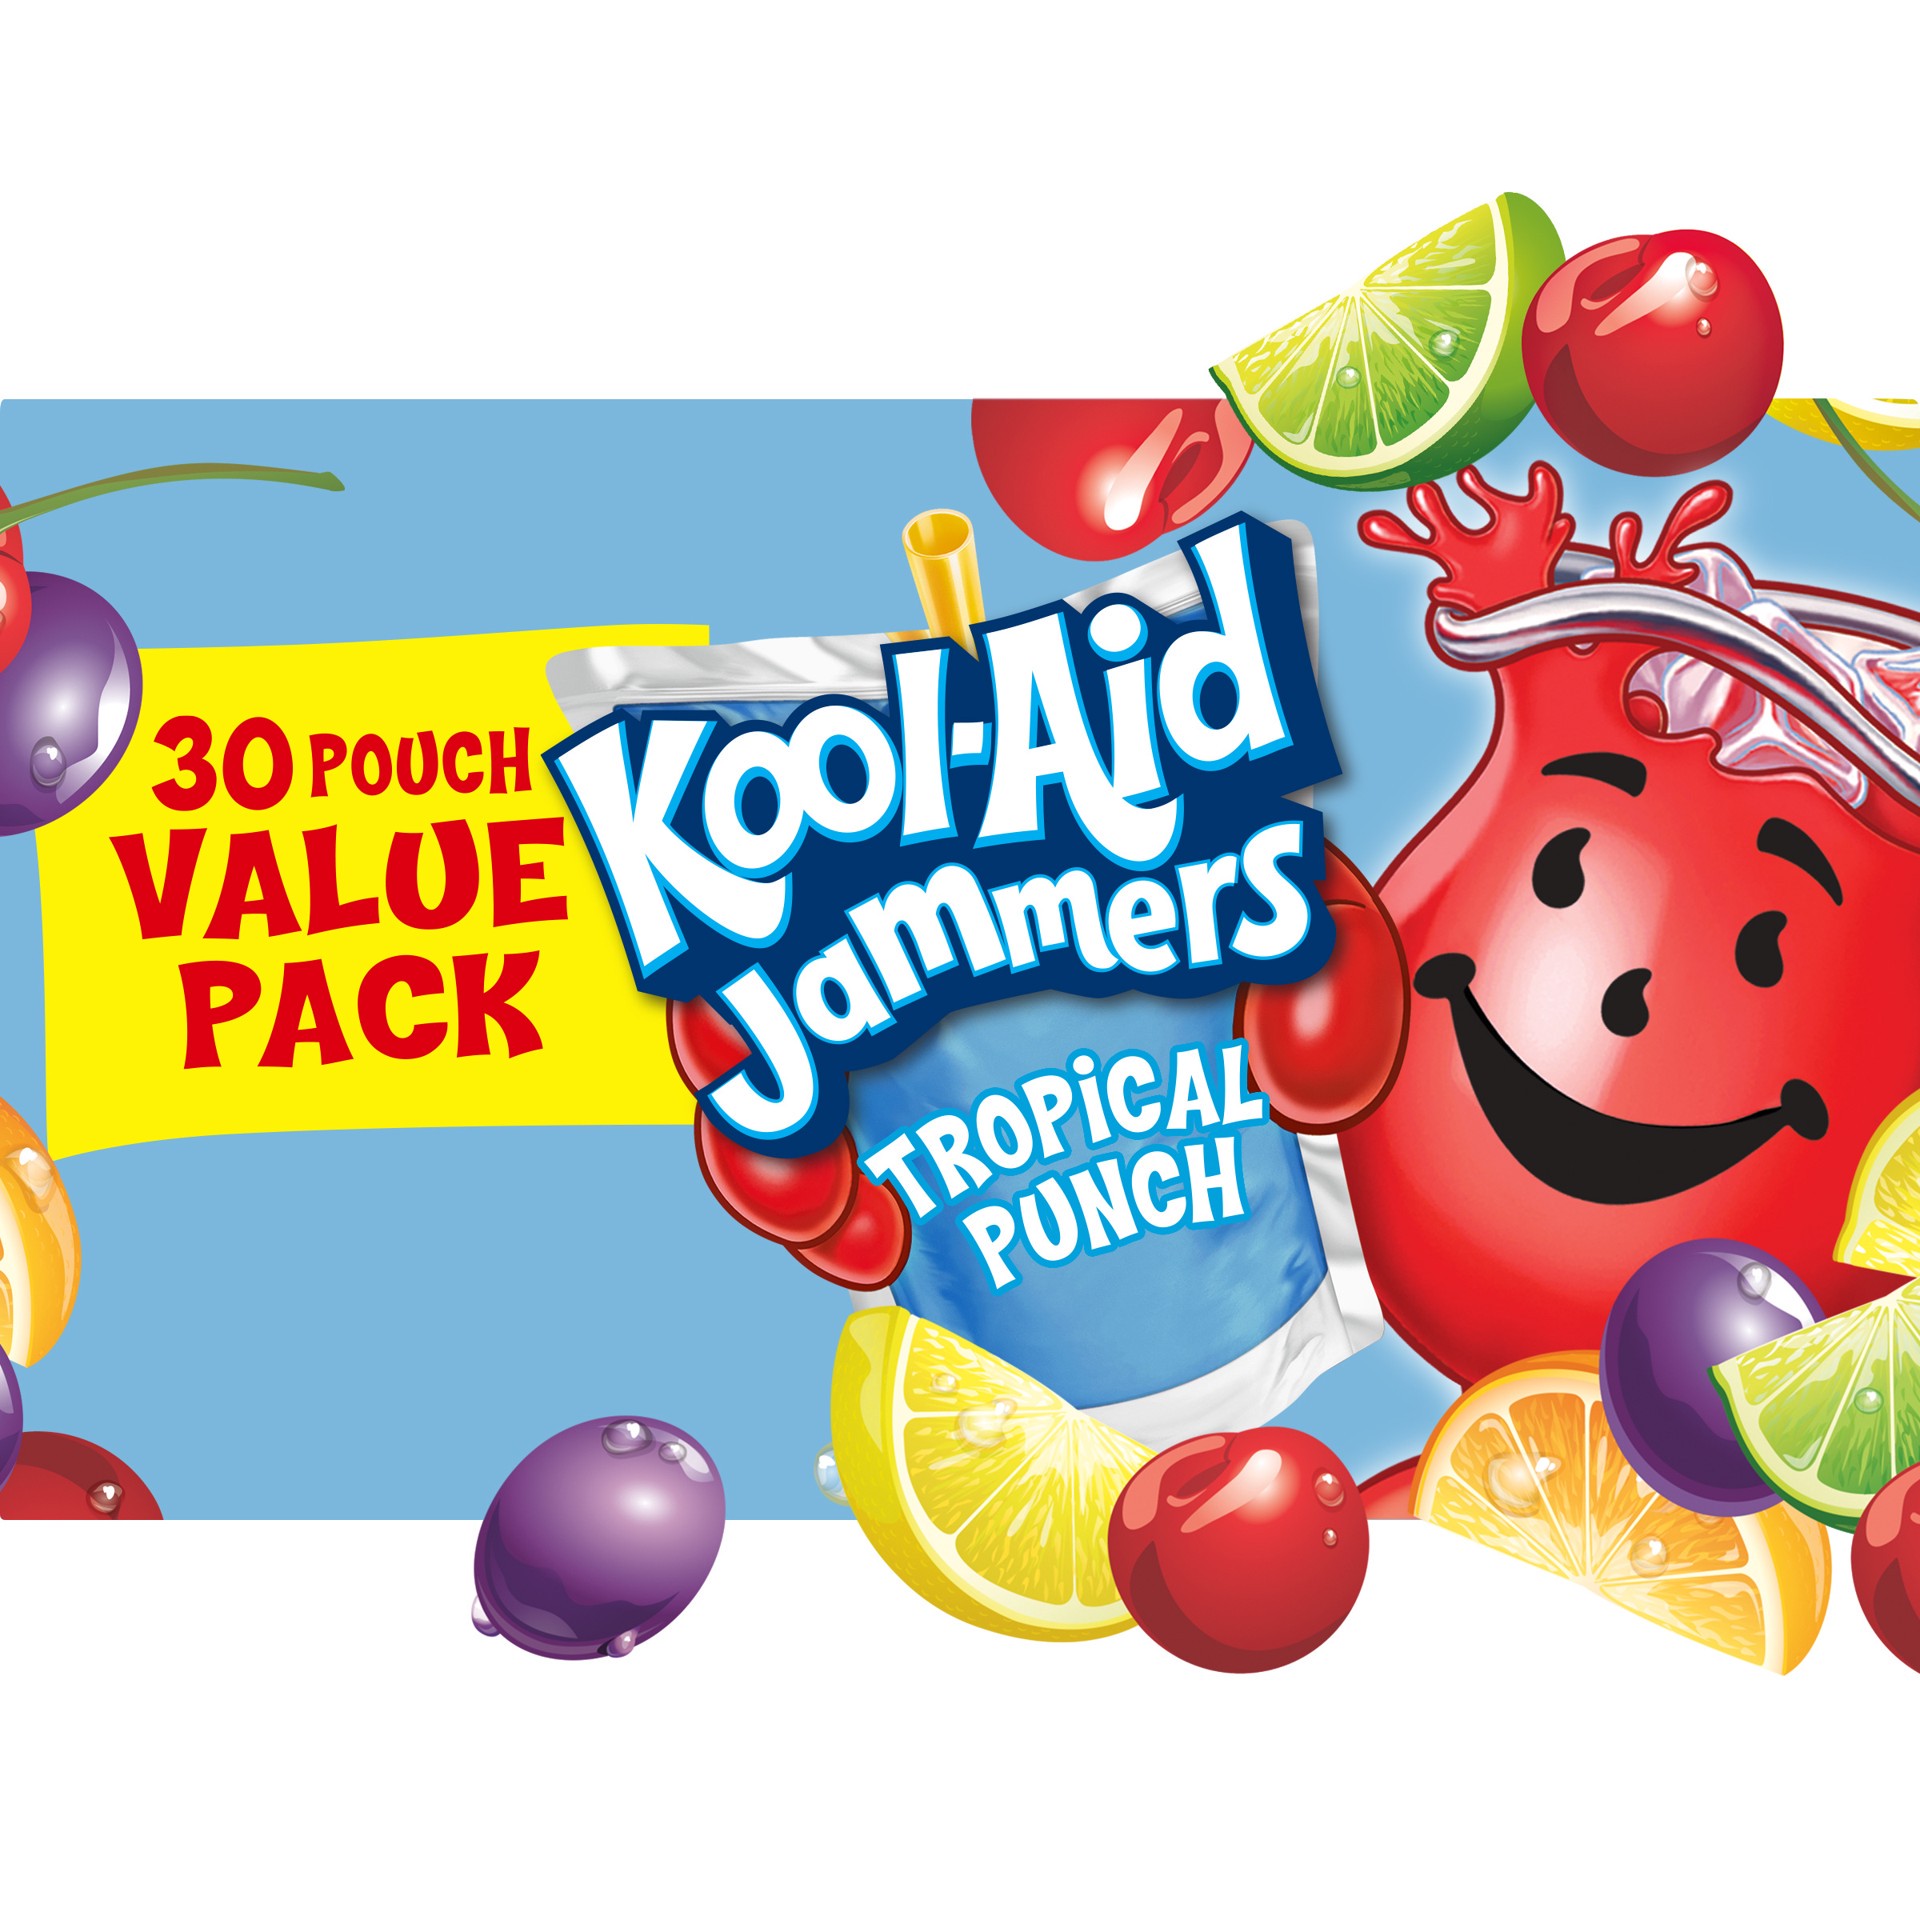 slide 1 of 5, Kool-Aid Jammers Tropical Punch Flavored 0% Juice Drink Value Pack, 30 ct Box, 6 fl oz Pouches, 30 ct